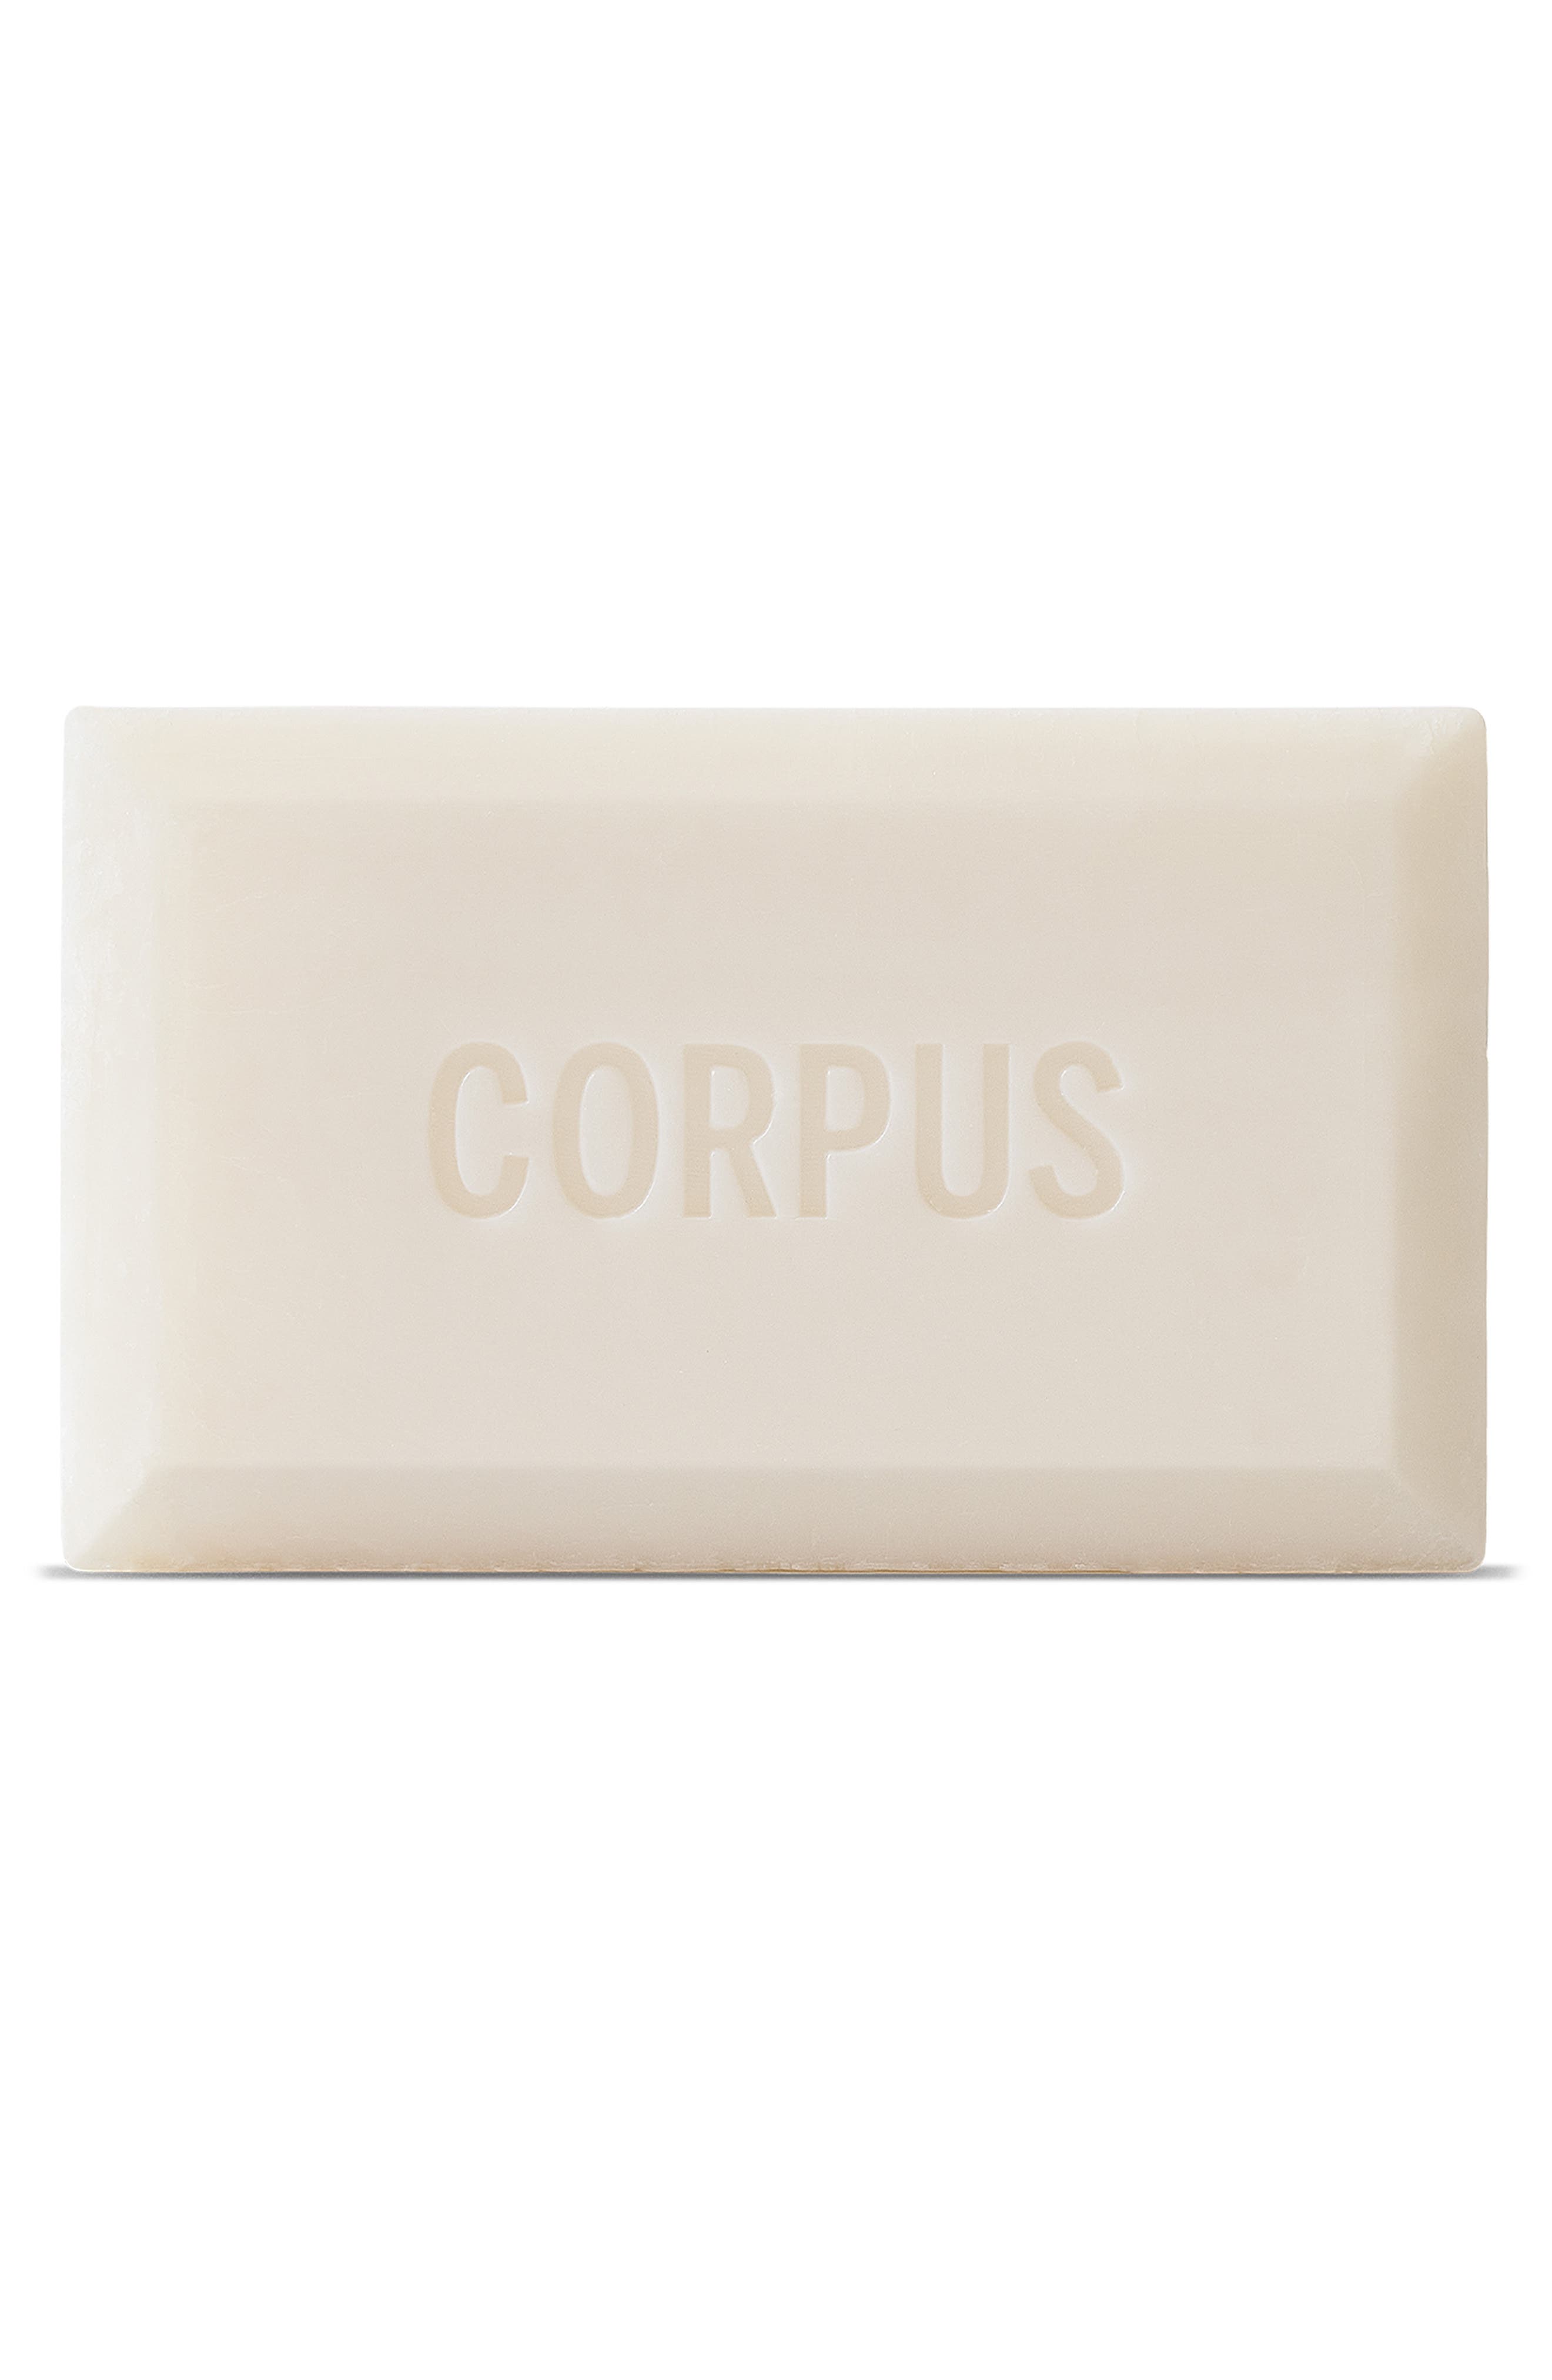 CORPUS Natural Cleansing Bar Soap in No Green